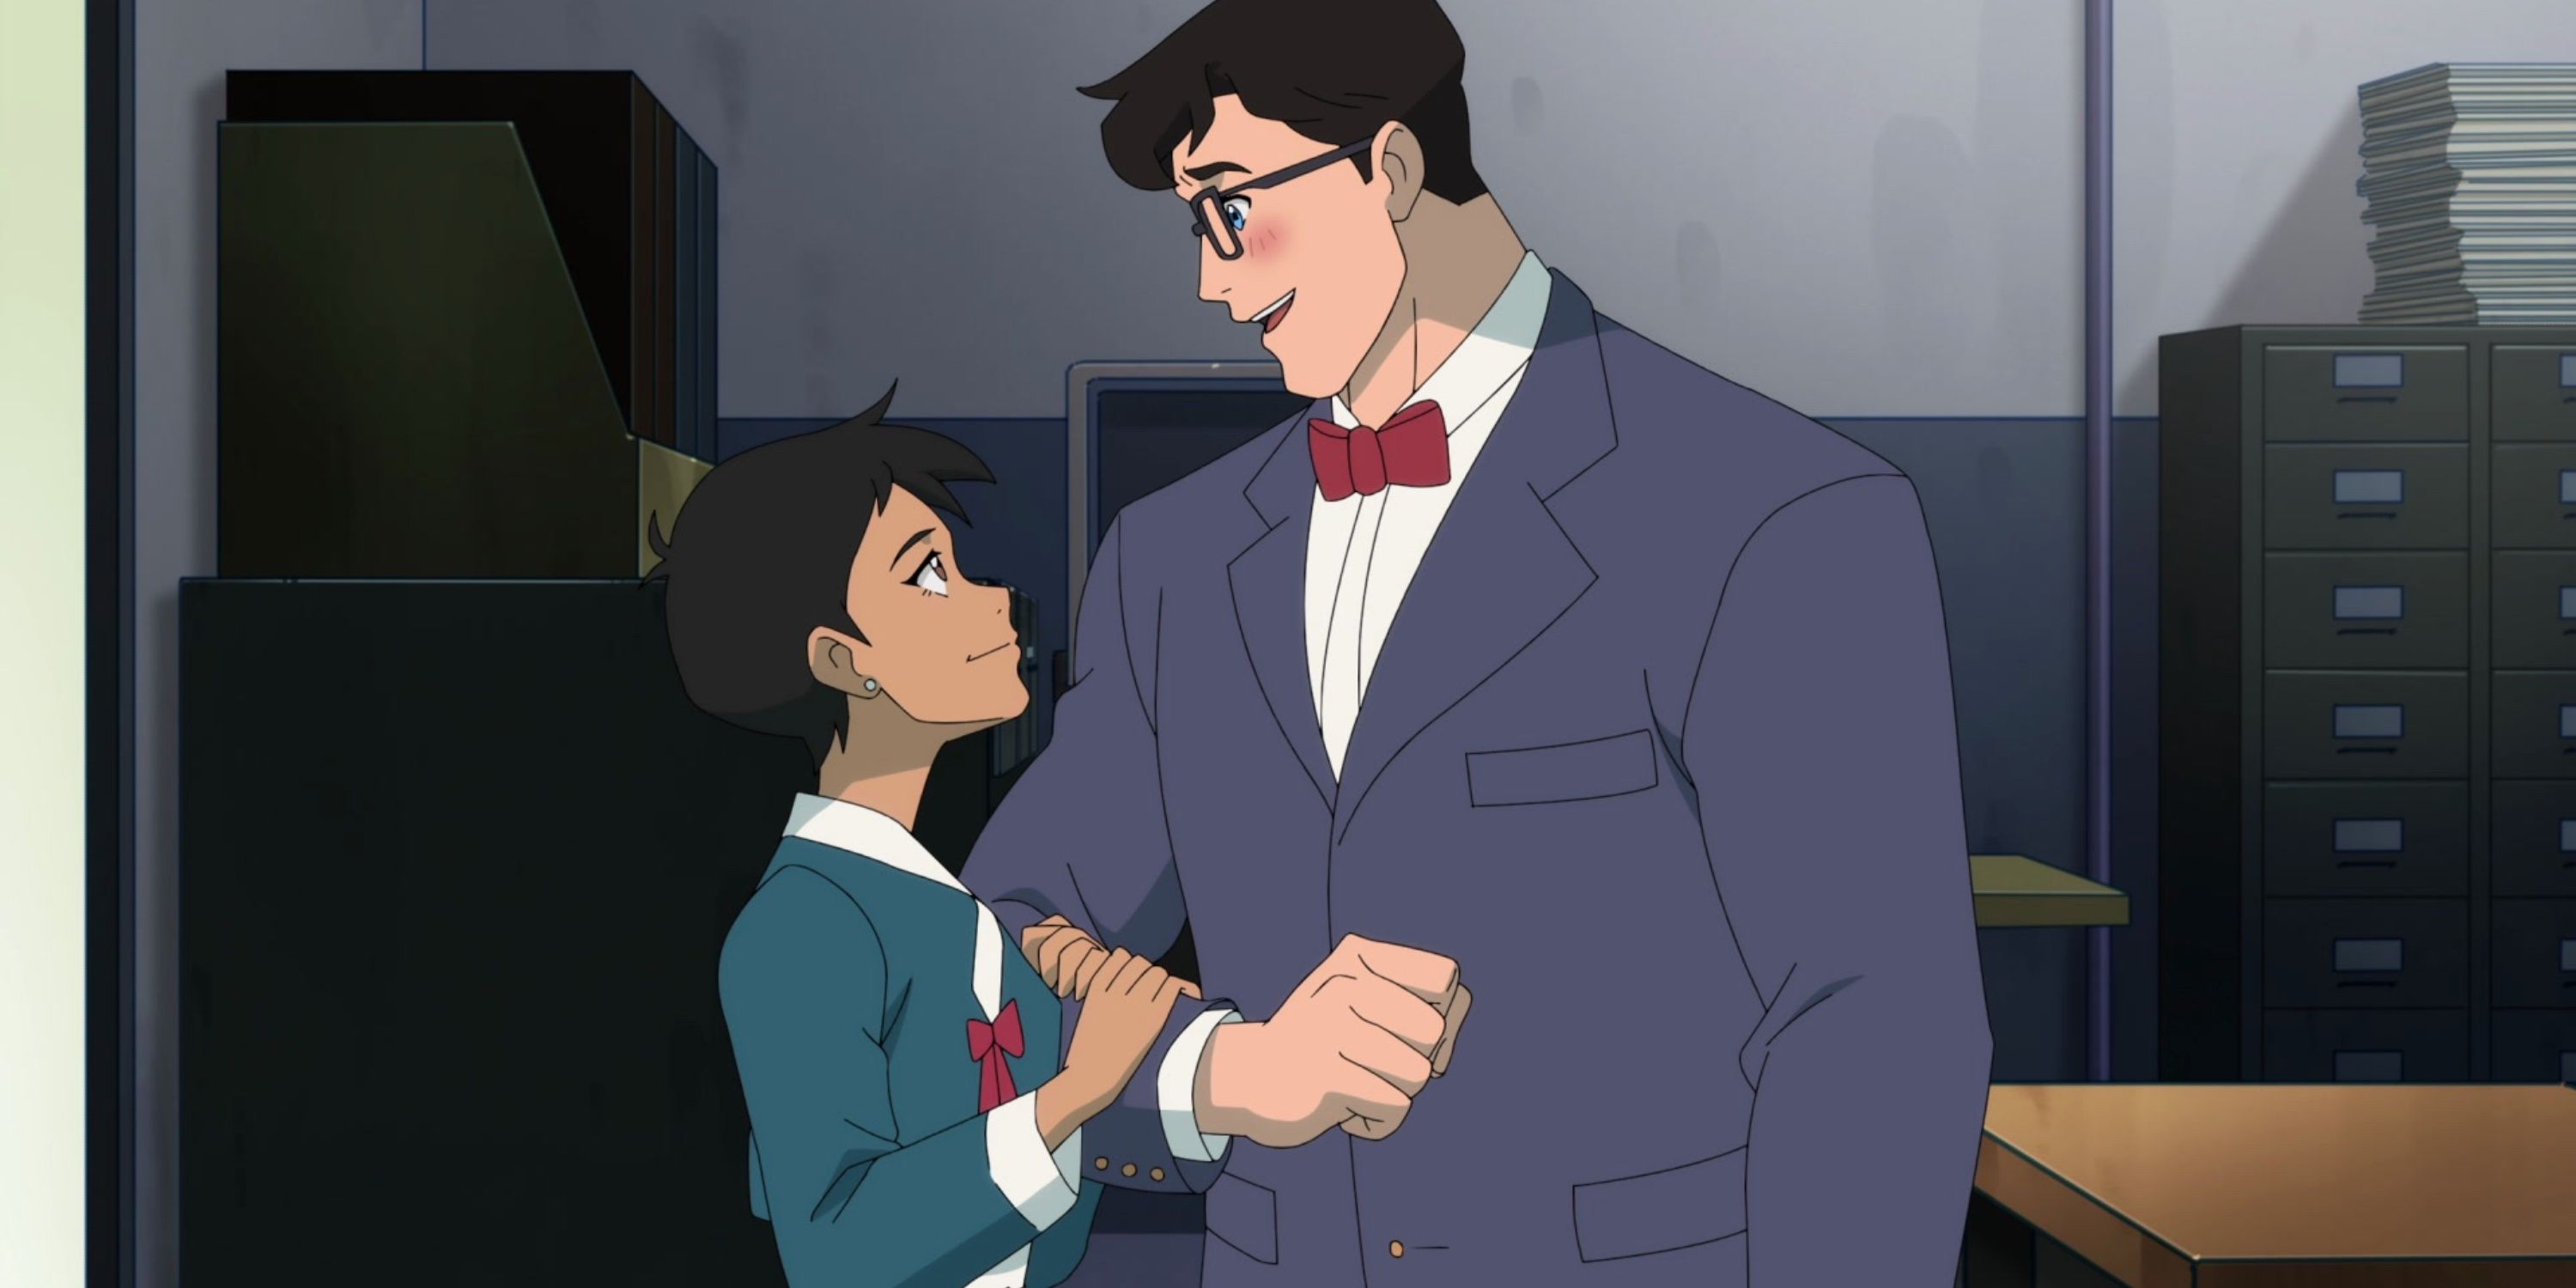 This Superman Series Has the Best On-Screen Relationship Between Clark and Lois